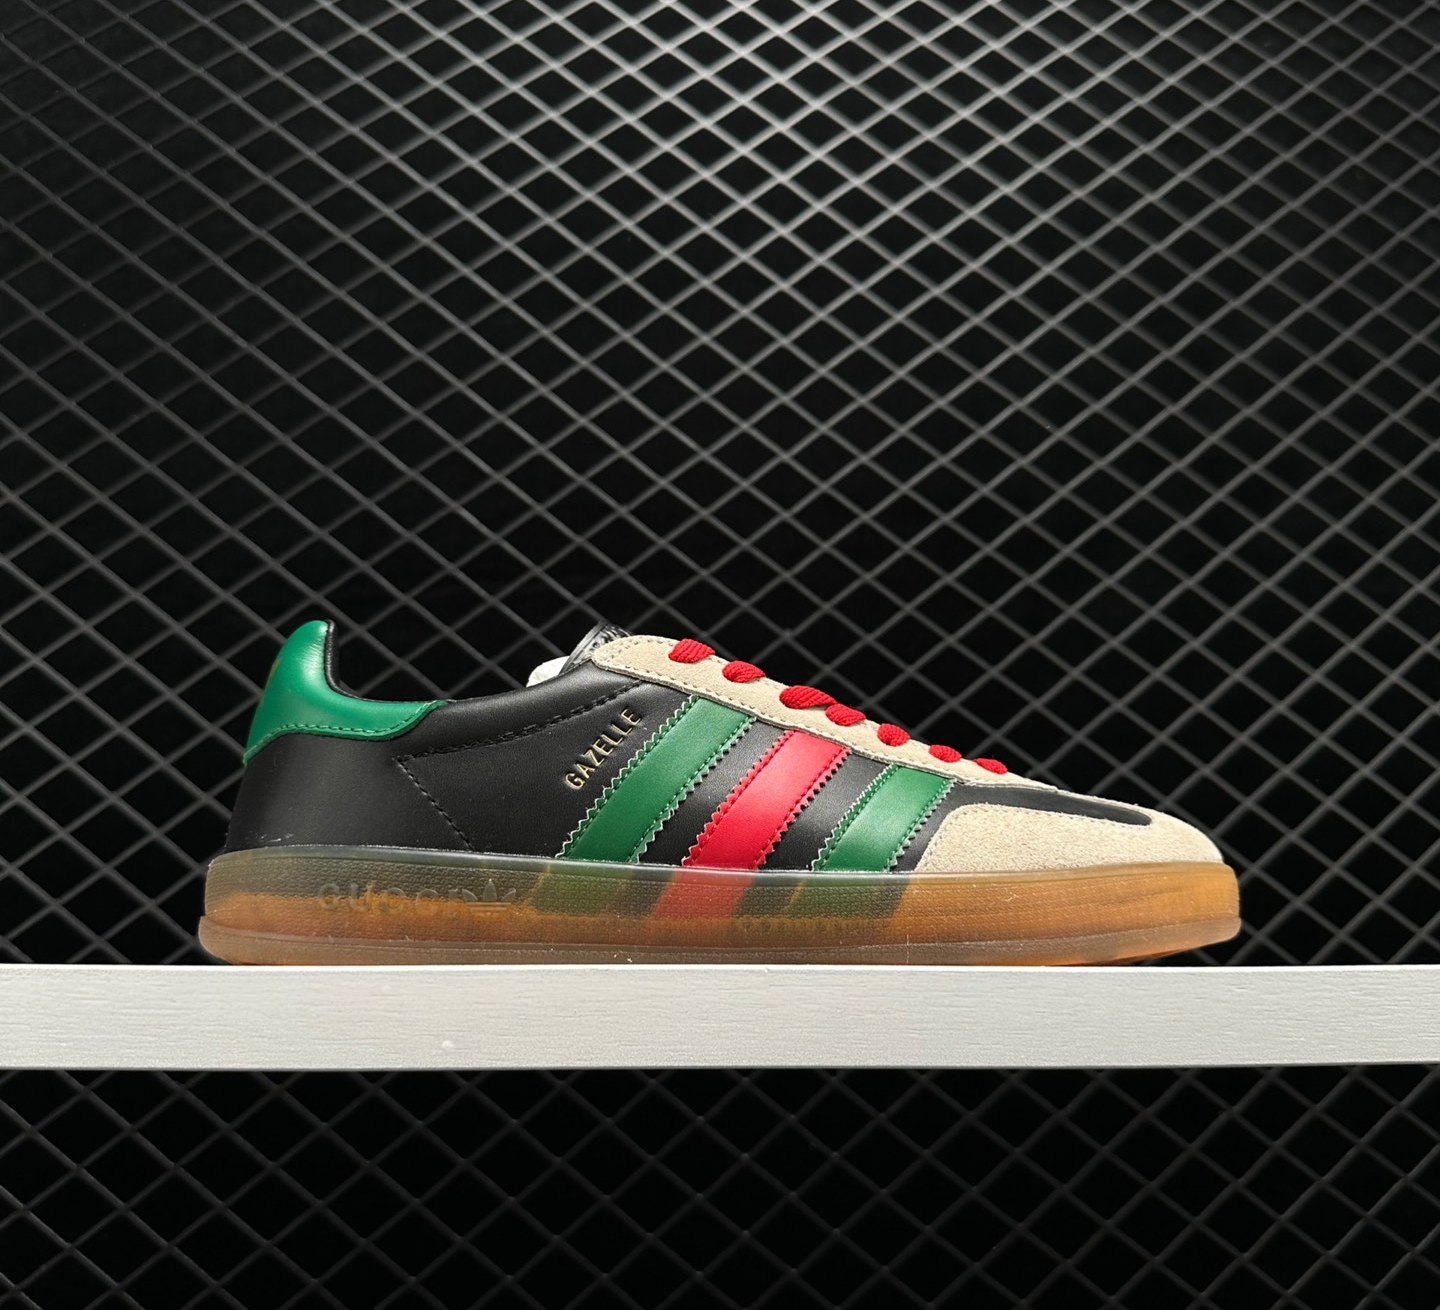 Adidas x Gucci Gazelle 'Black Green Red' 726487 AAA43 9549 - Stylish Collaboration for Sneaker Enthusiasts